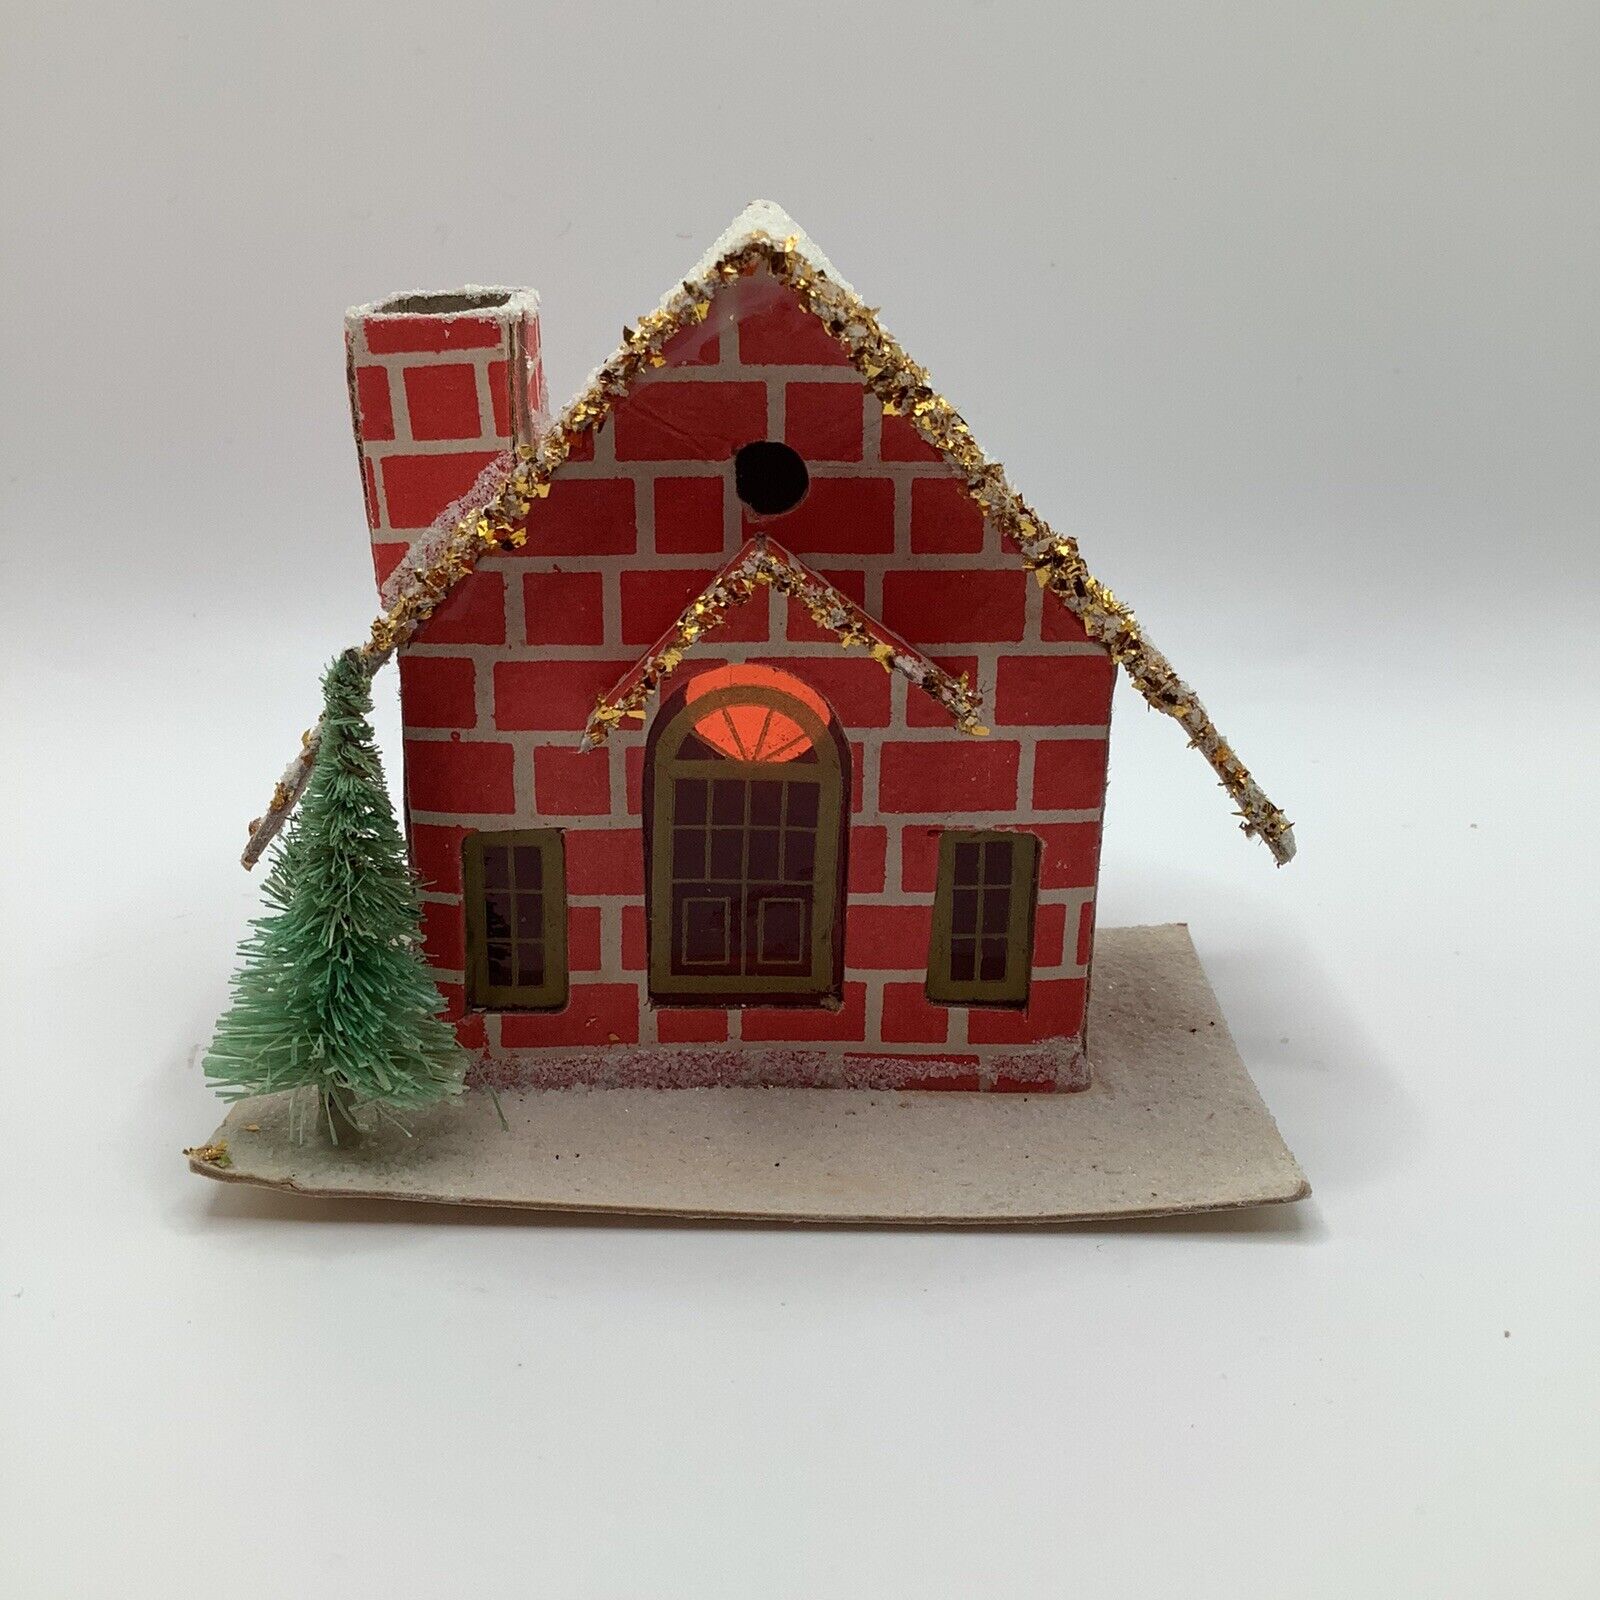 Vintage Putz Cardboard Village House With Cellophane Windows Made In Taiwan 